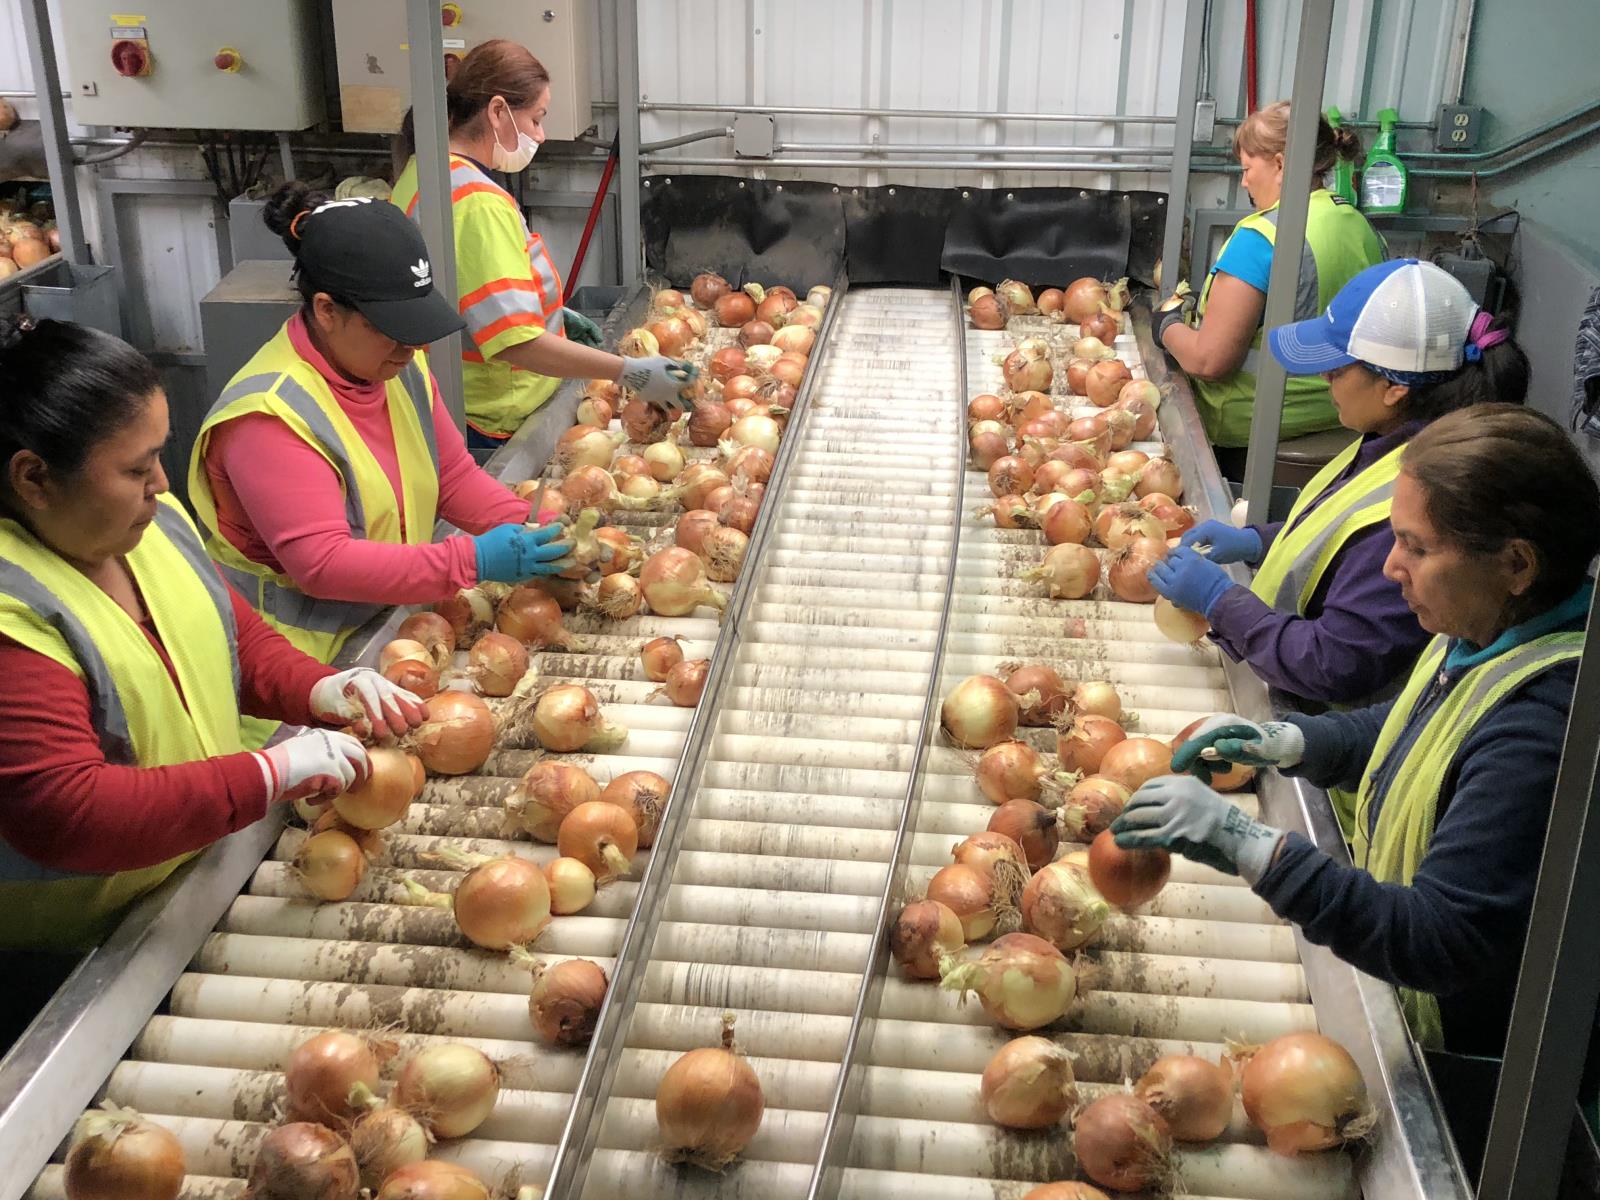 Onions are sorted in a southwestern Idaho facility Sept. 10. After declining for four straight years, Idaho’s total net farm income increased 29 percent in 2018, according to USDA data released Aug. 30. 